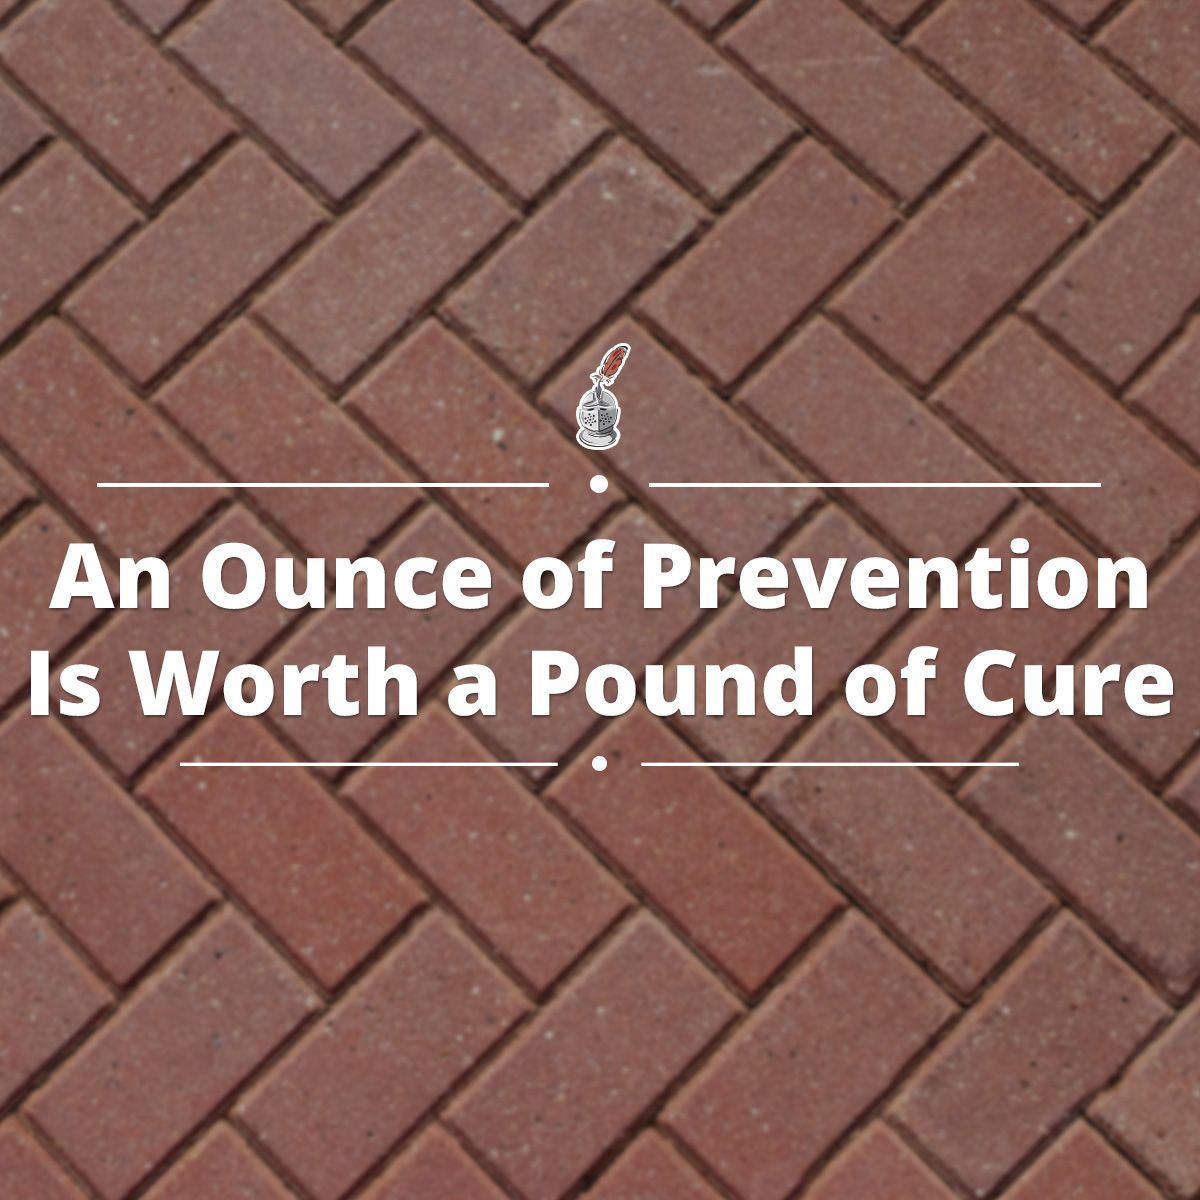 An Ounce of Prevention Is Worth a Pound of Cure